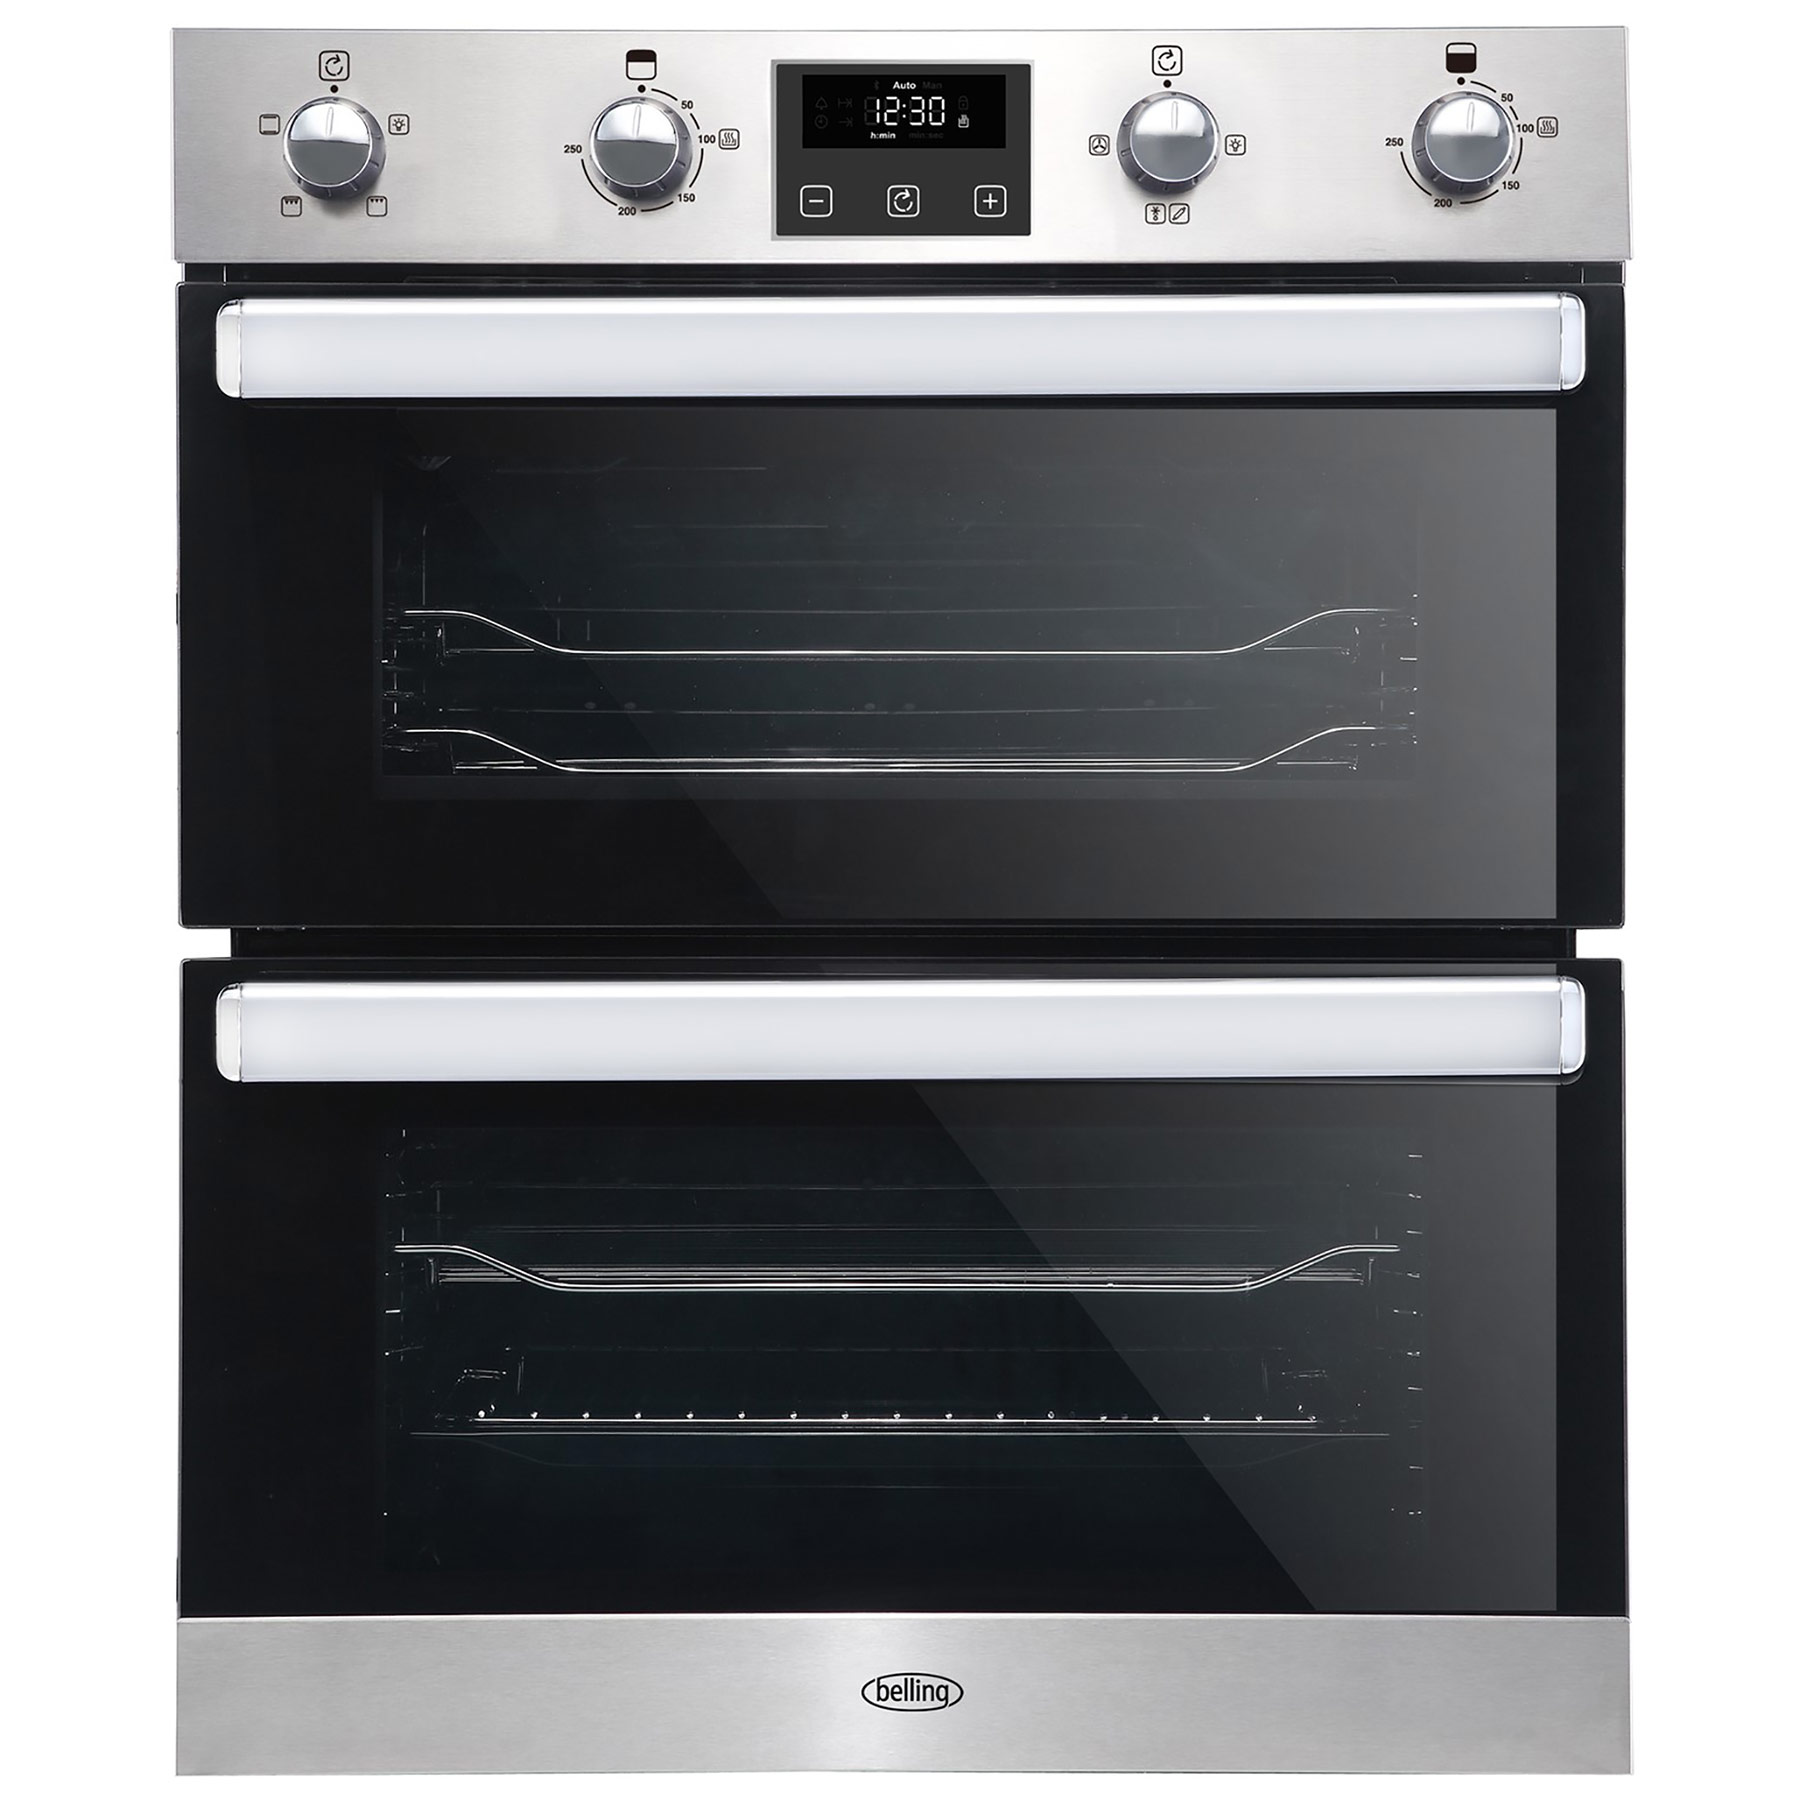 Belling 444444783 70cm Built Under Electric Double Oven Stainless Stee